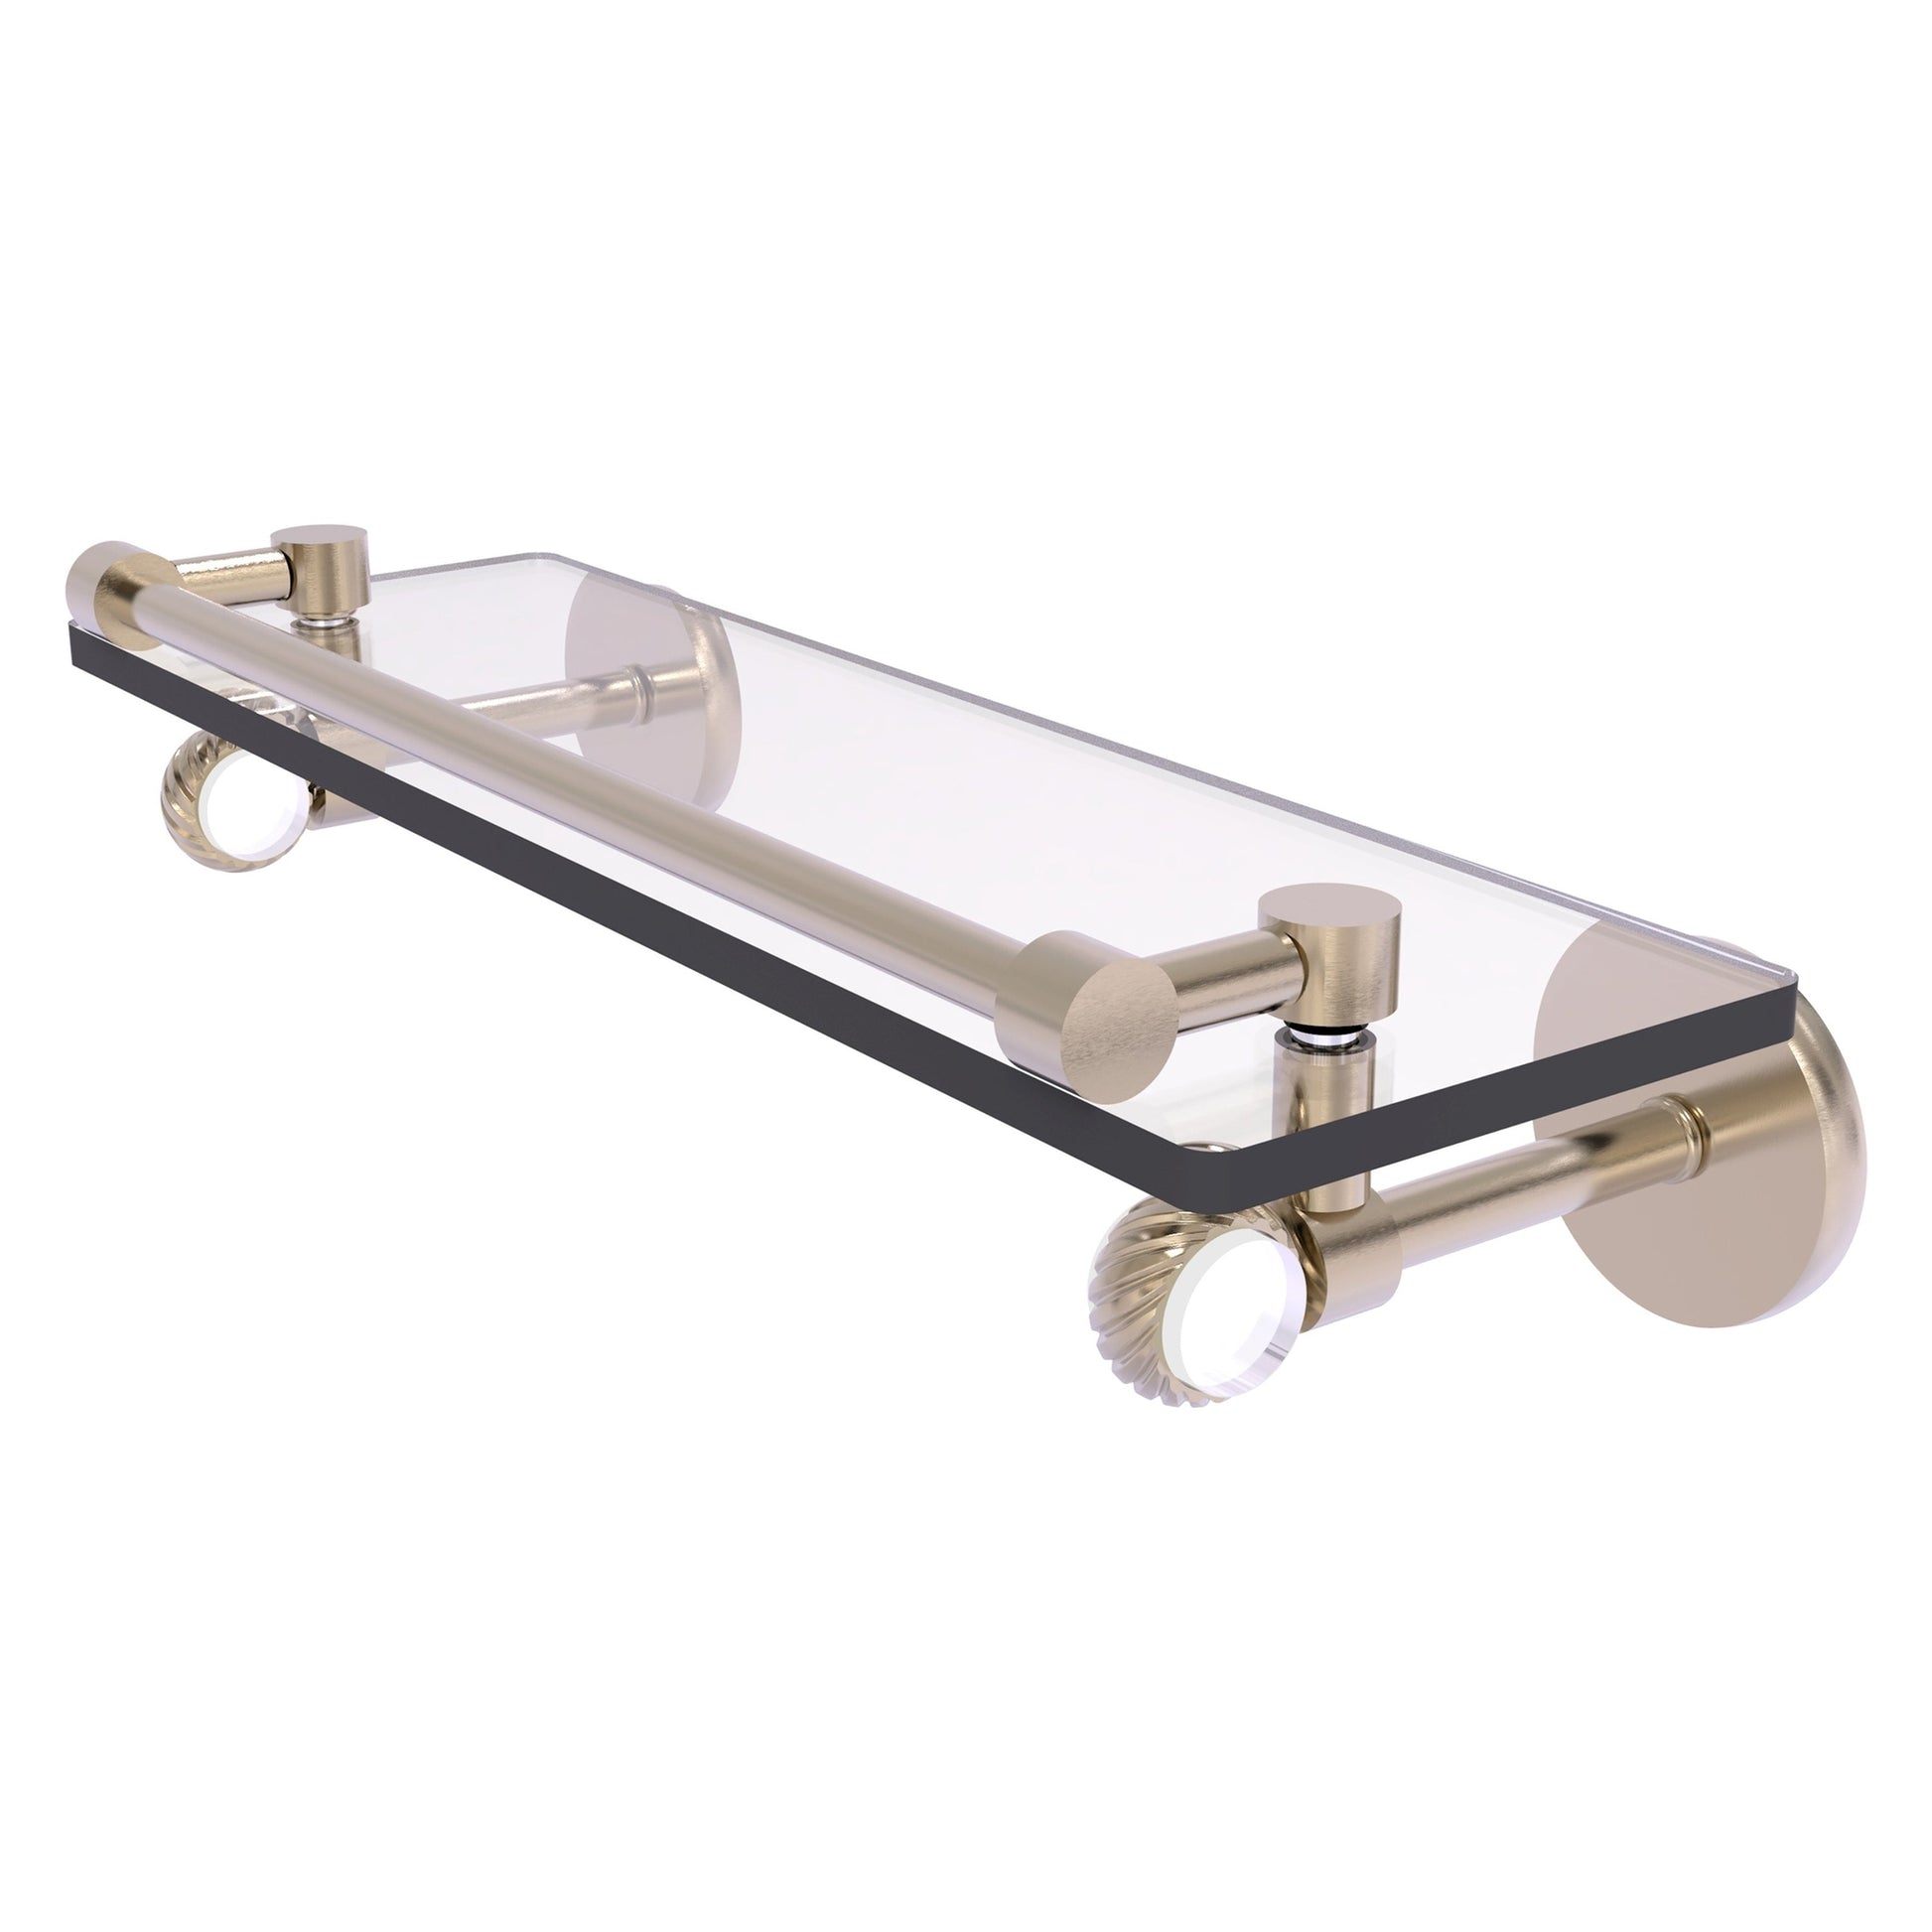 https://usbathstore.com/cdn/shop/files/Allied-Brass-Clearview-16-x-5_65-Antique-Pewter-Solid-Brass-Gallery-Rail-Glass-Shelf-With-Twisted-Accents.jpg?v=1694396825&width=1946